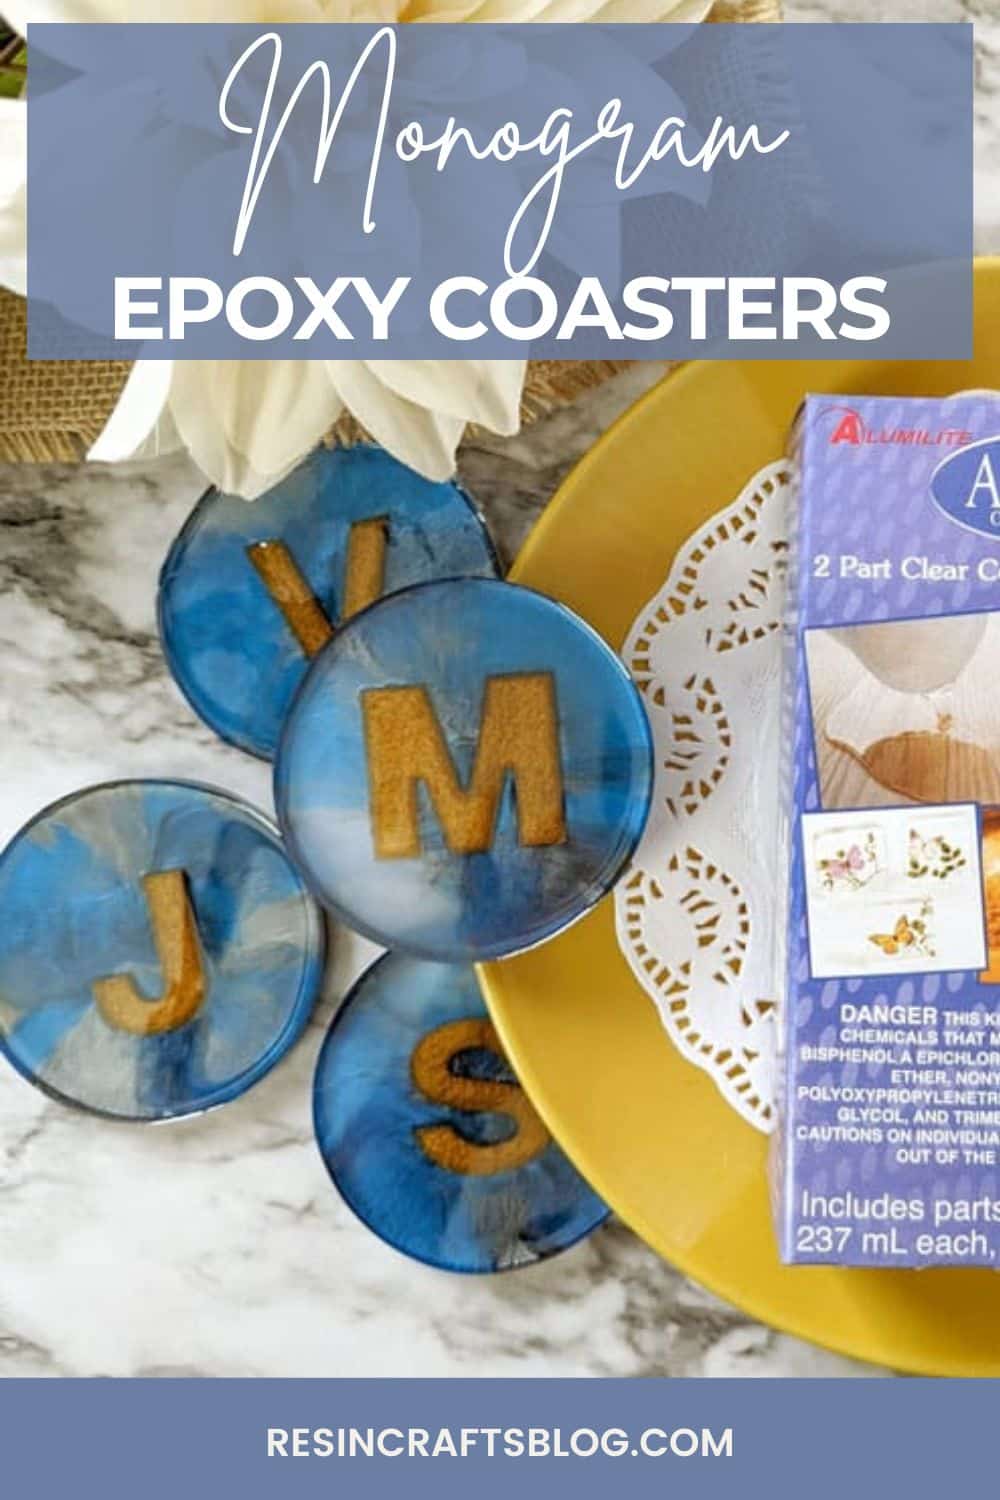 Learn how to make monogram resin coasters. To put a twist on personalized coasters, I'm adding a resin letter to the center of each one. via @resincraftsblog